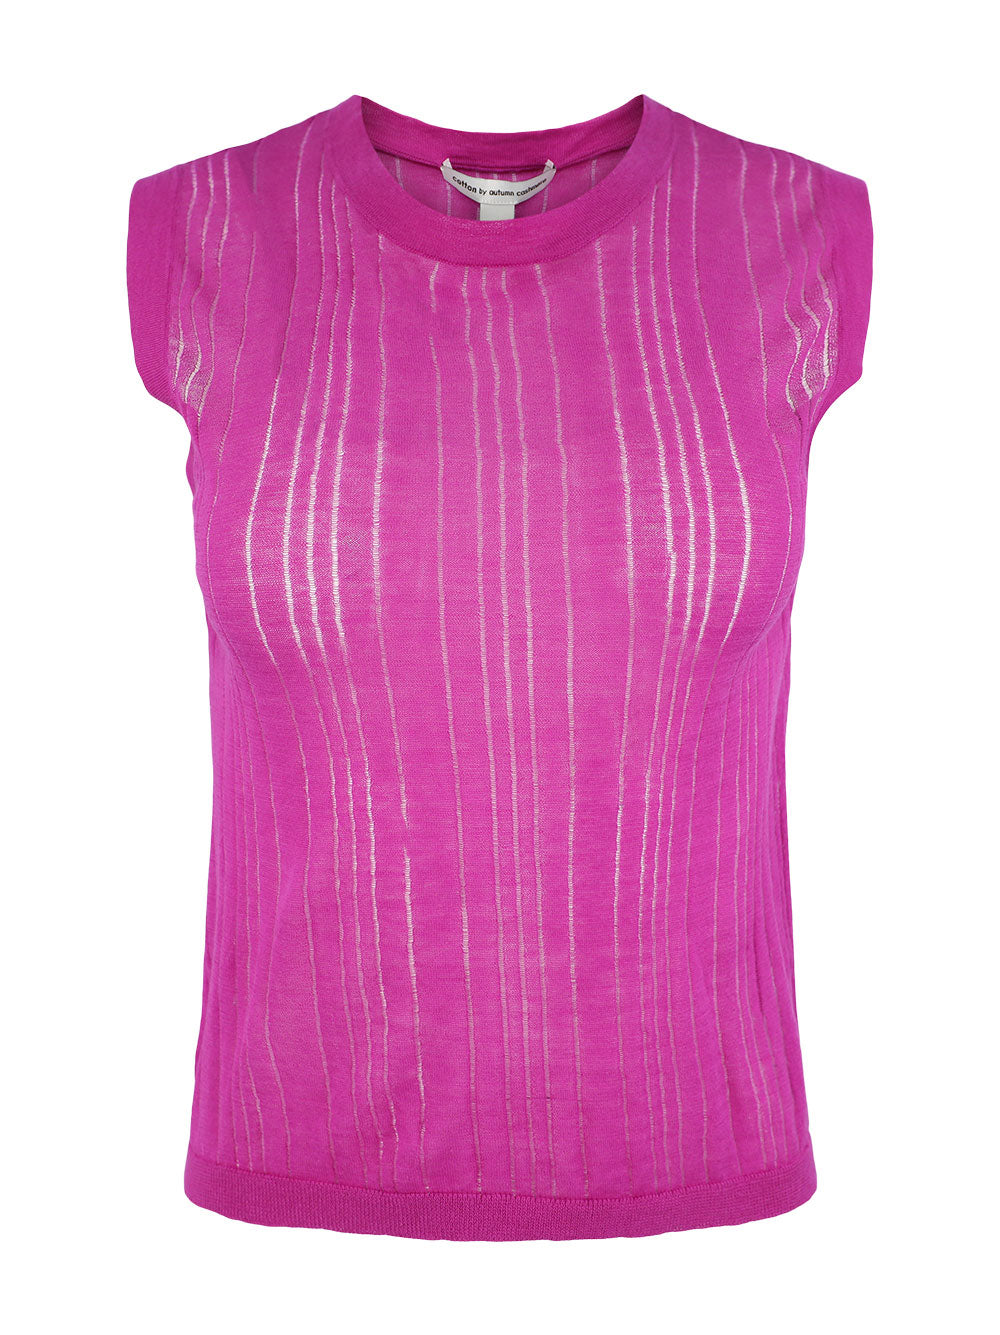 Autumn Cashmere Variegated Rib Muscle Tee in Magenta